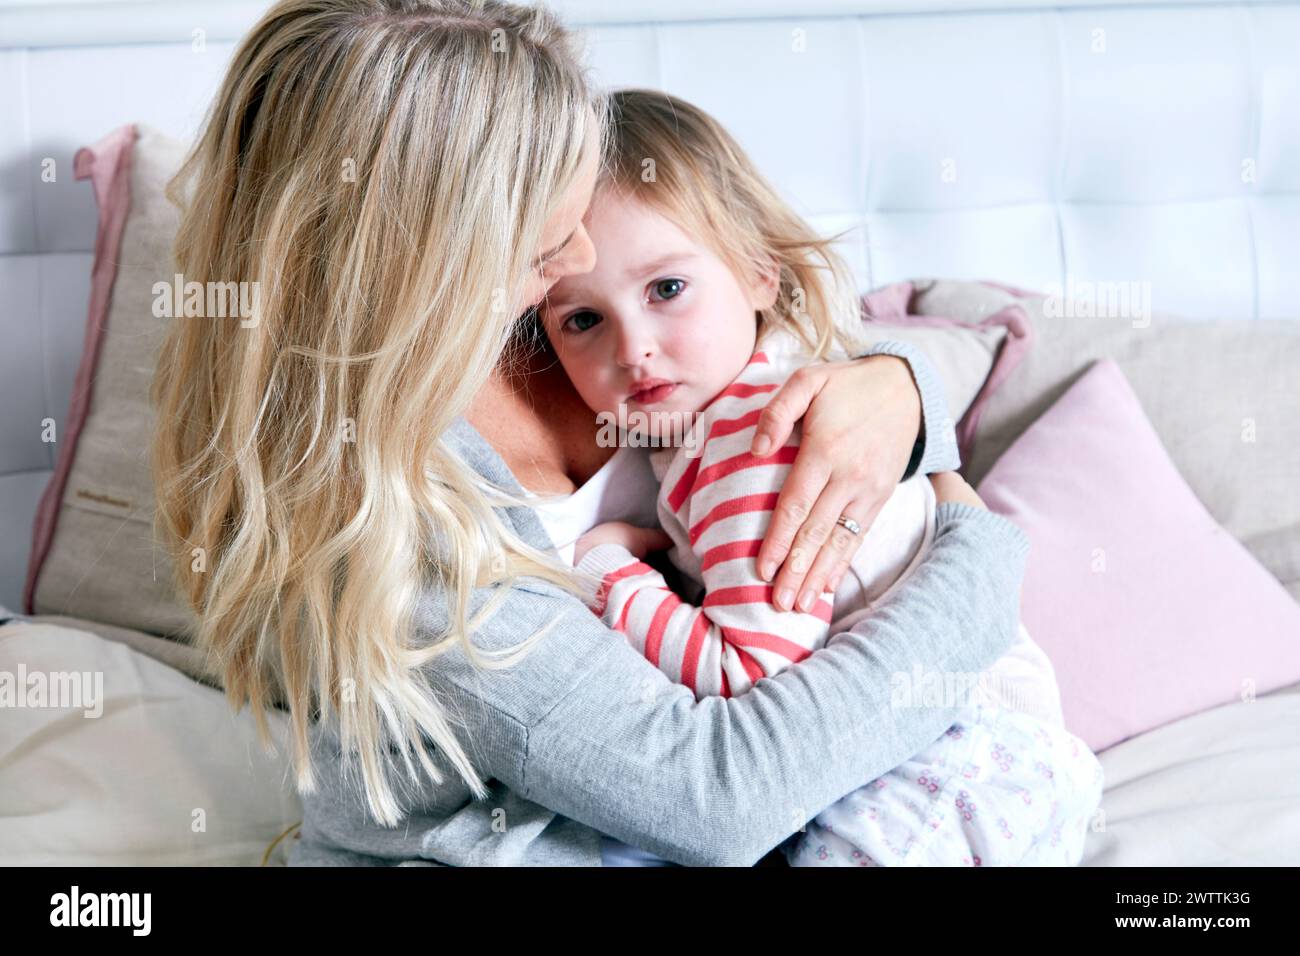 Mother comforting her sad child on a bed Stock Photo